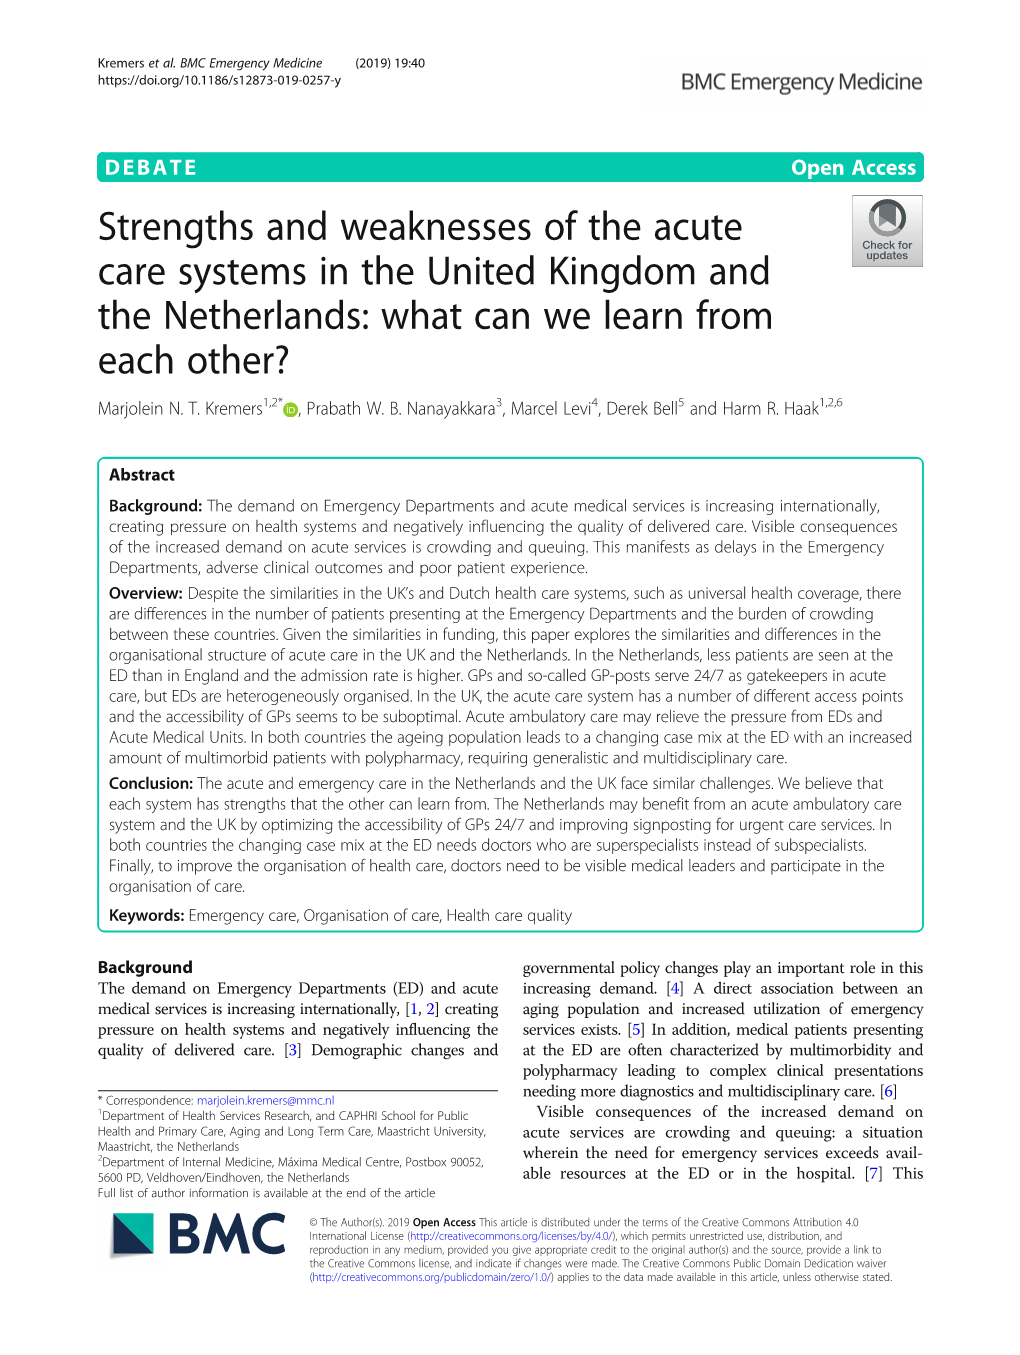 Strengths and Weaknesses of the Acute Care Systems in the United Kingdom and the Netherlands: What Can We Learn from Each Other? Marjolein N